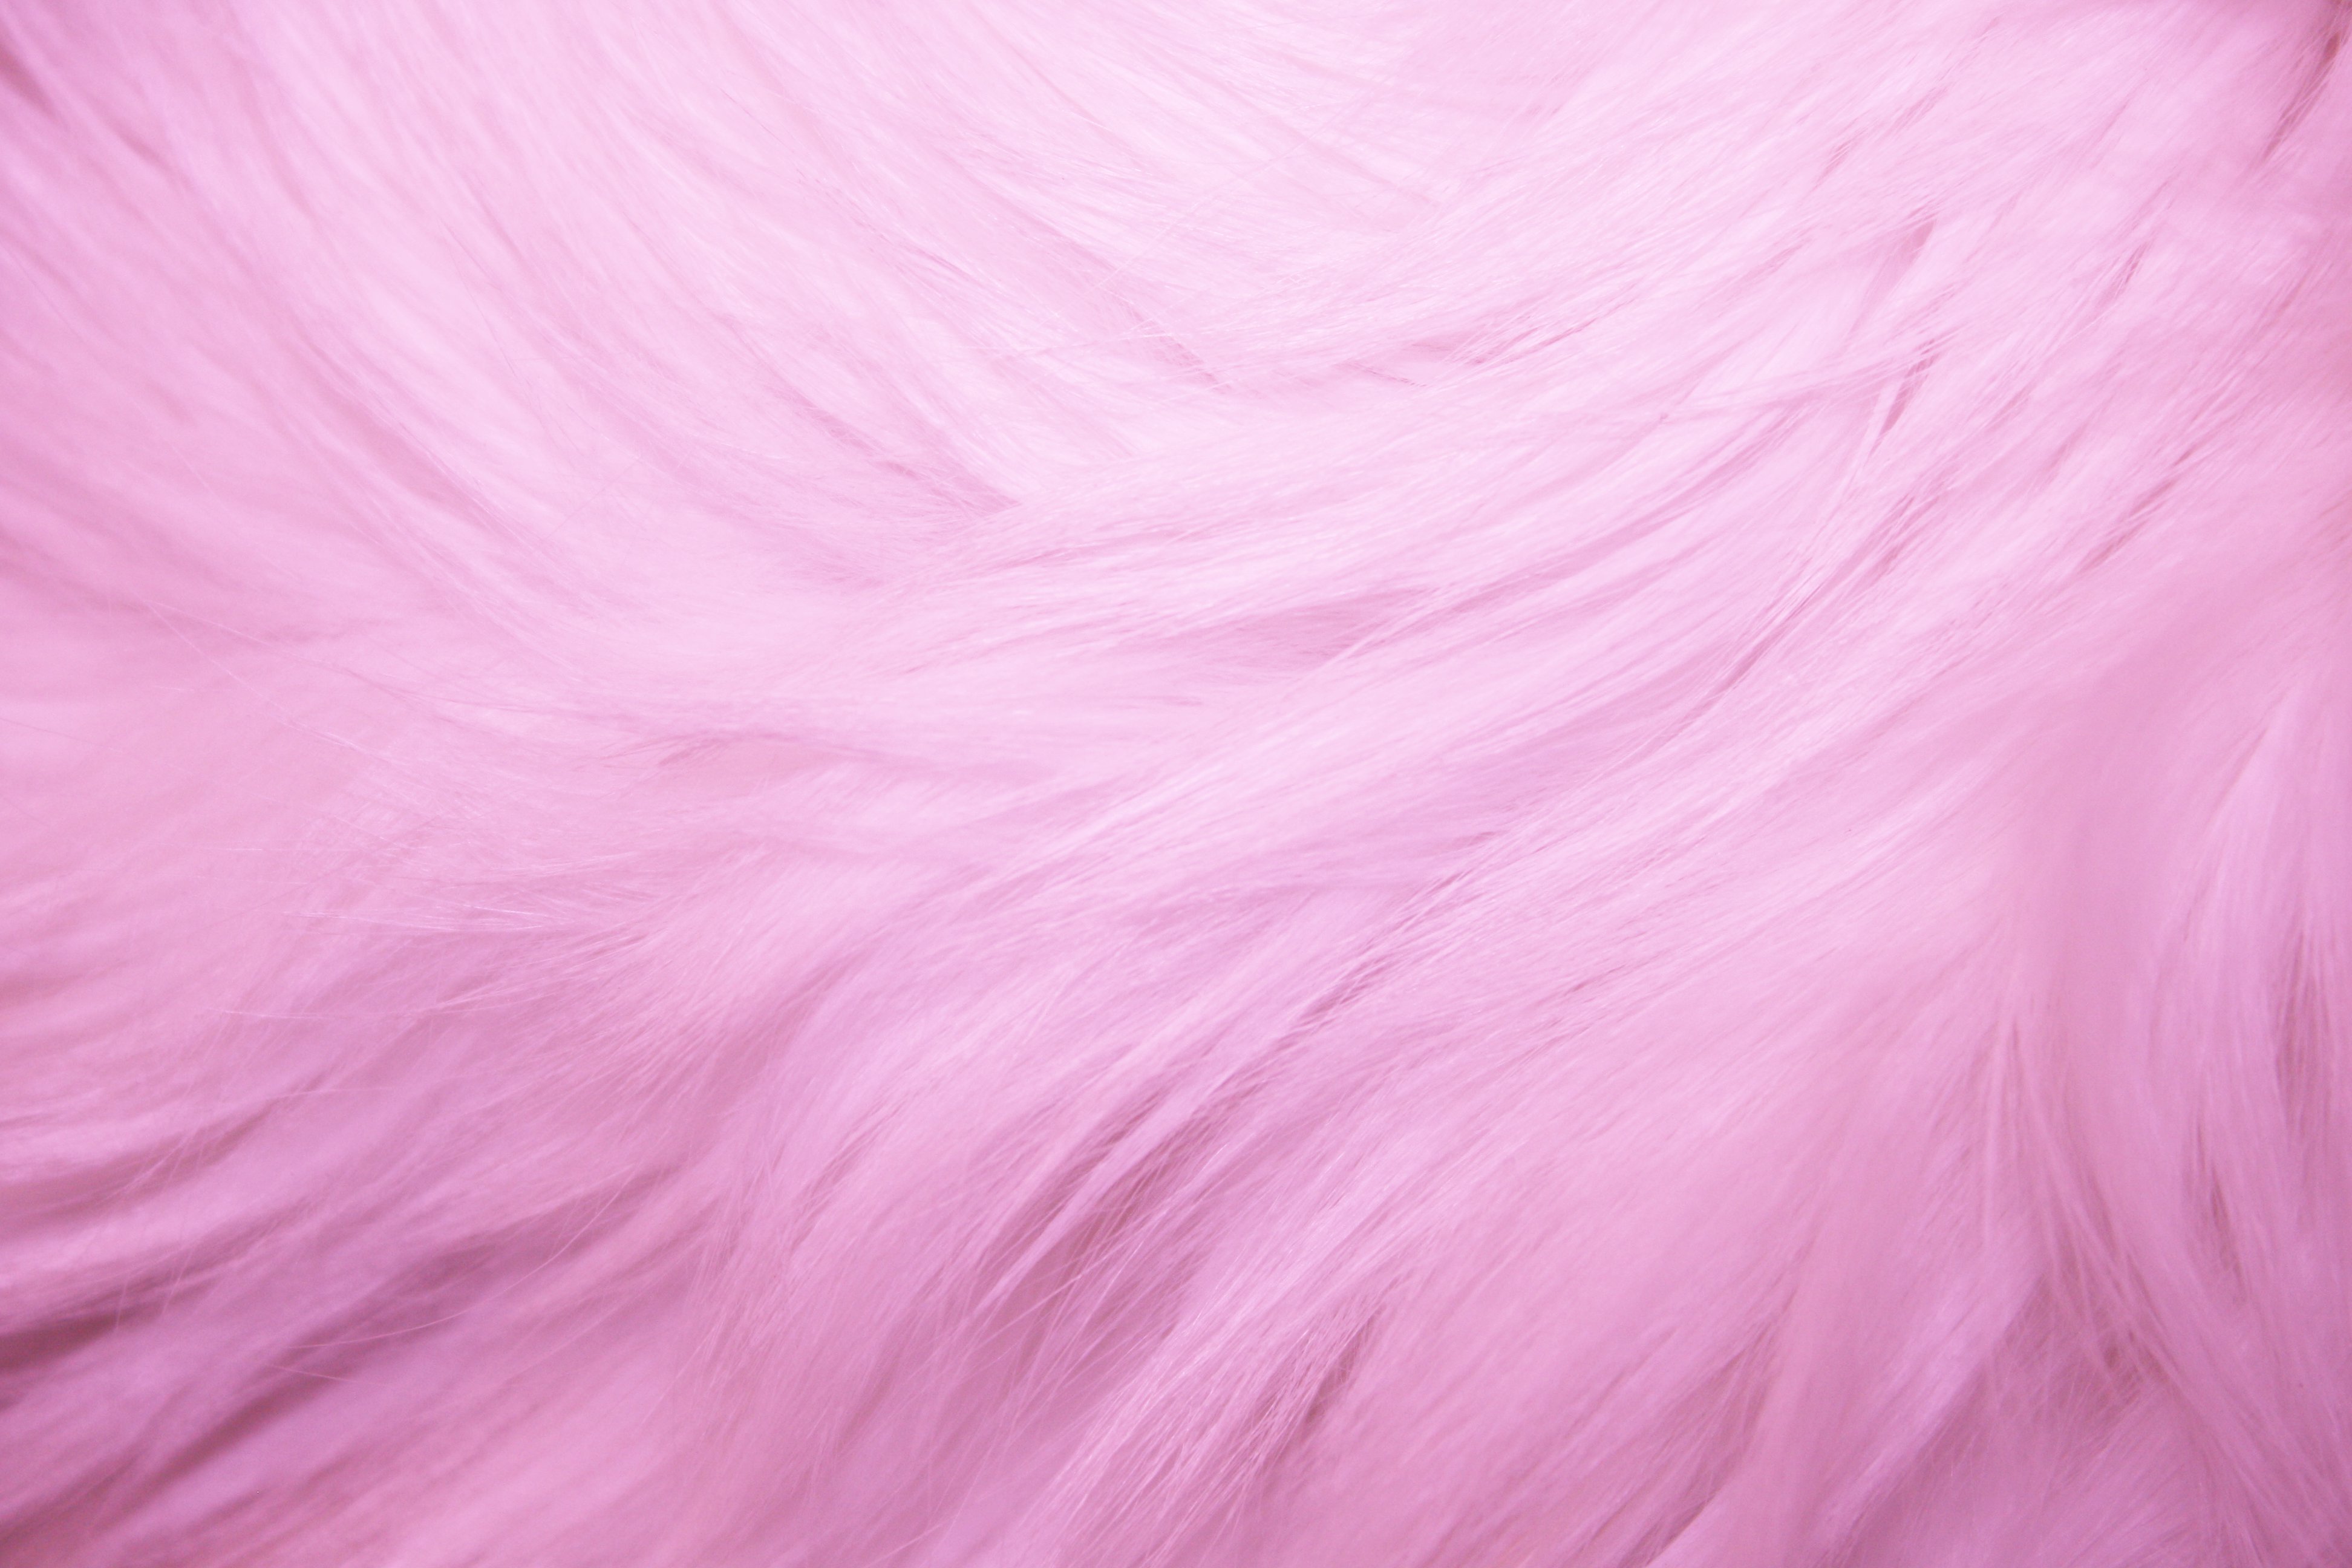 Pink Fur Texture High Resolution Photo Dimensions